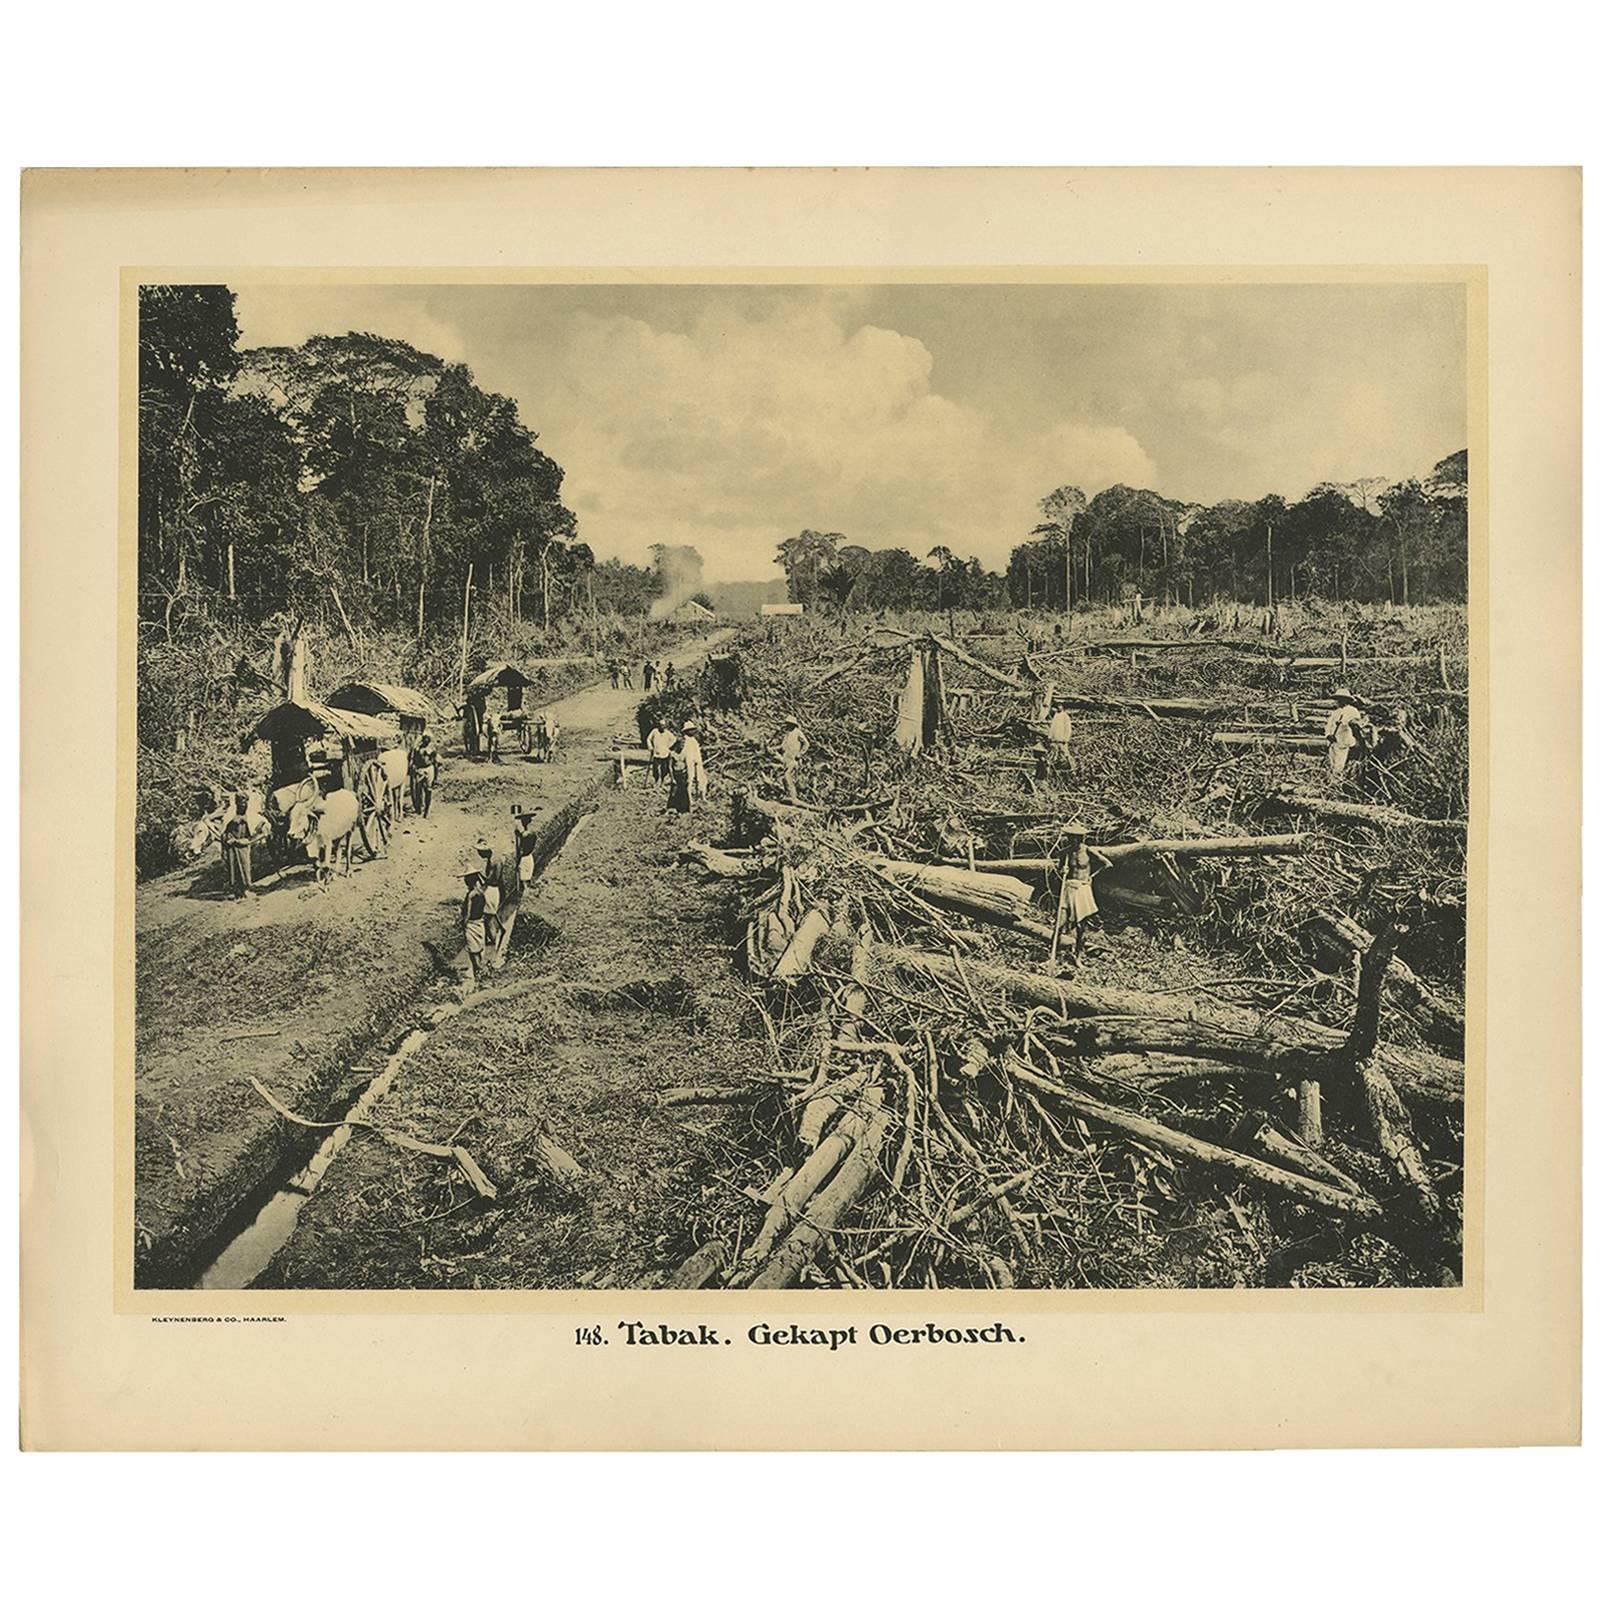 Photographic Plate Illustrating Felling Timber by Kleynenberg, 1910